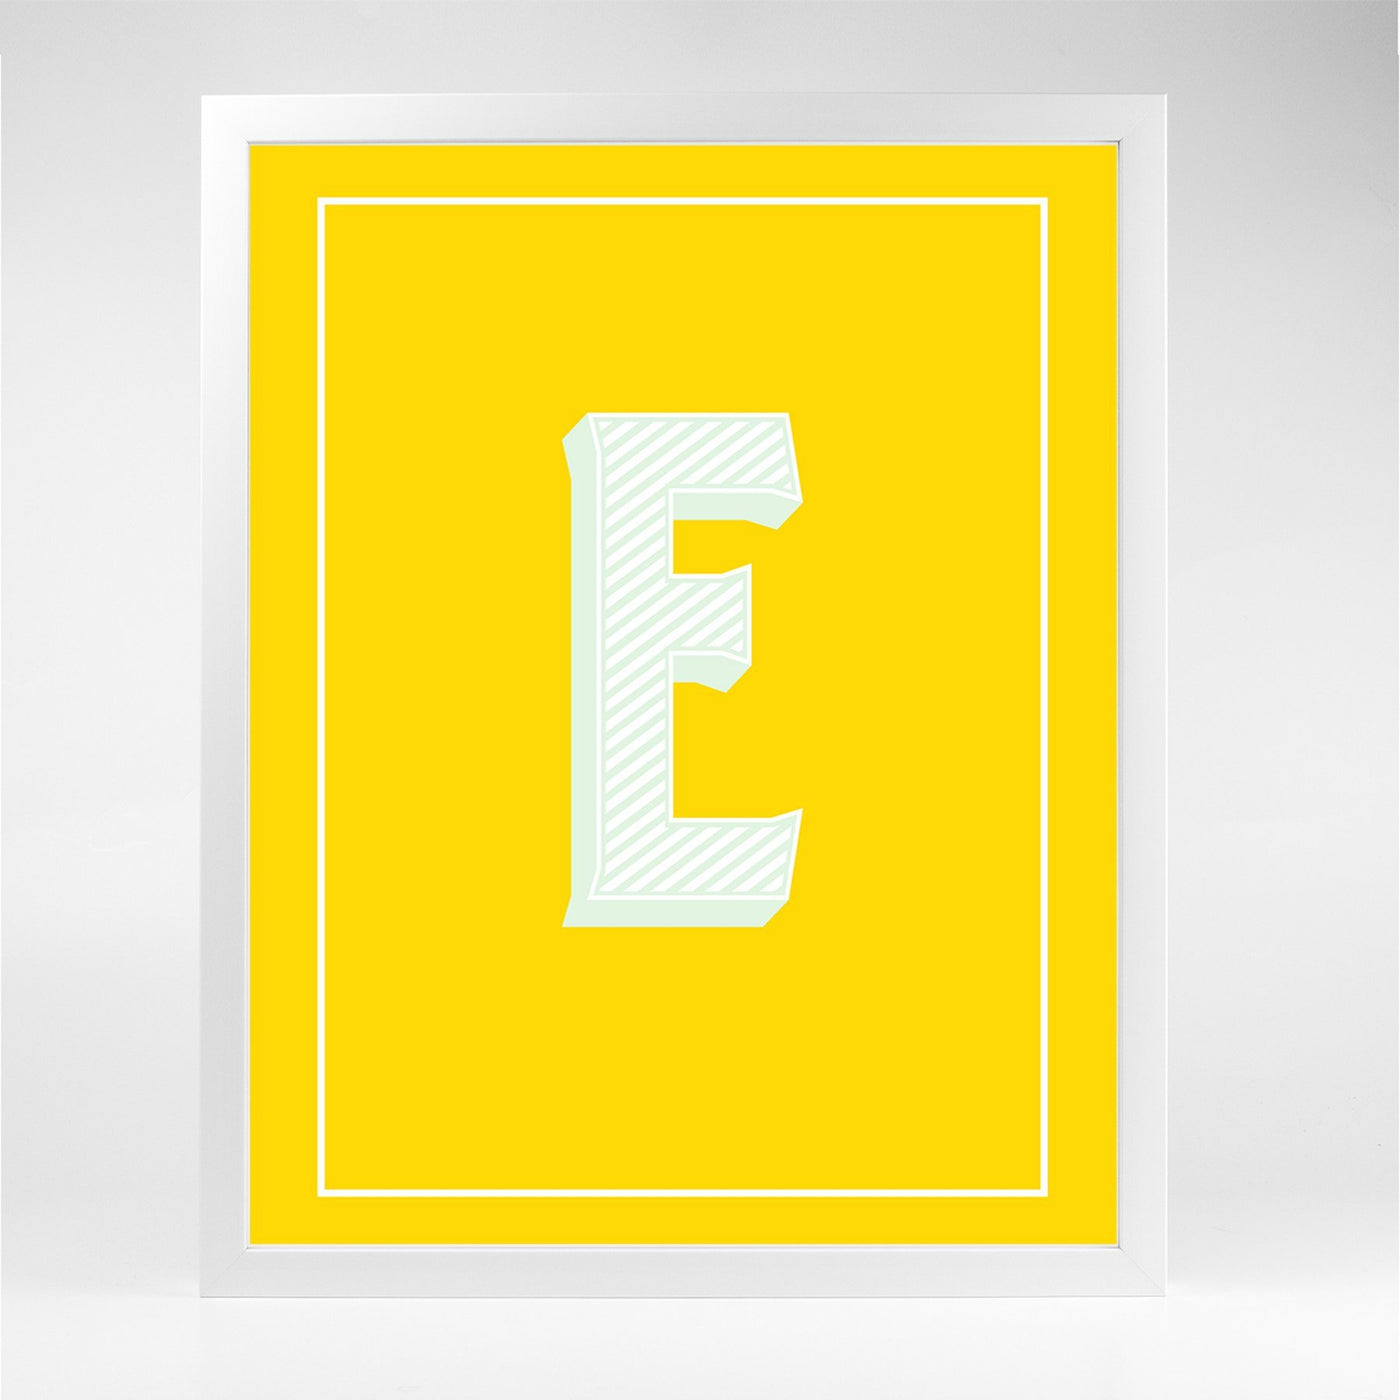 Gallery Prints E The Letter Series Katie Kime